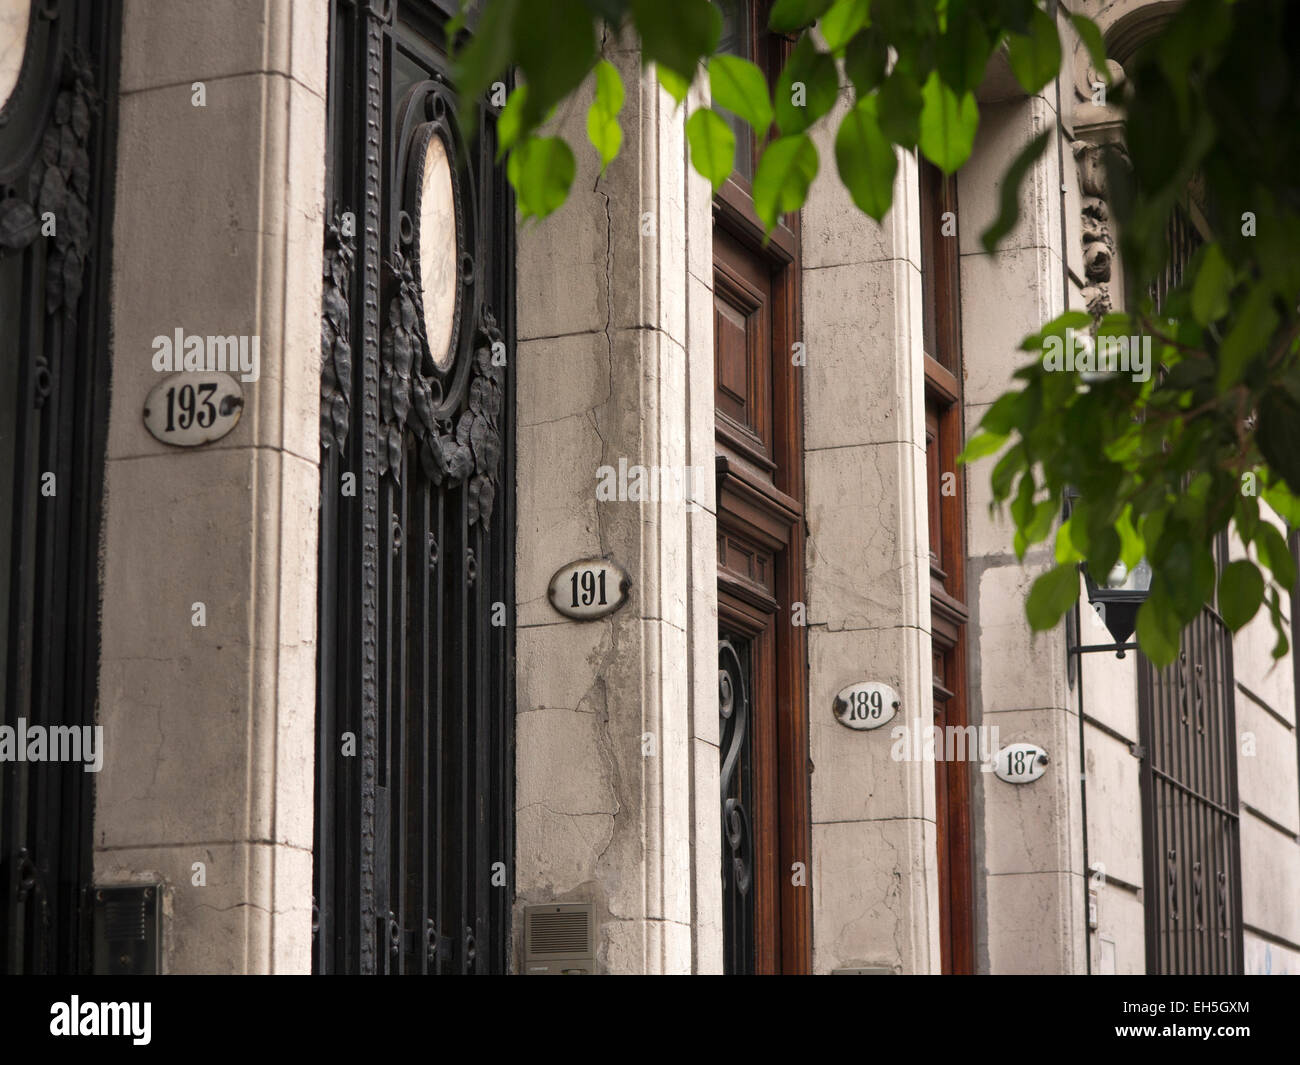 Argentina, Buenos Aires, Almagro, Quintino Bocayuva, house numbers on doorways Stock Photo